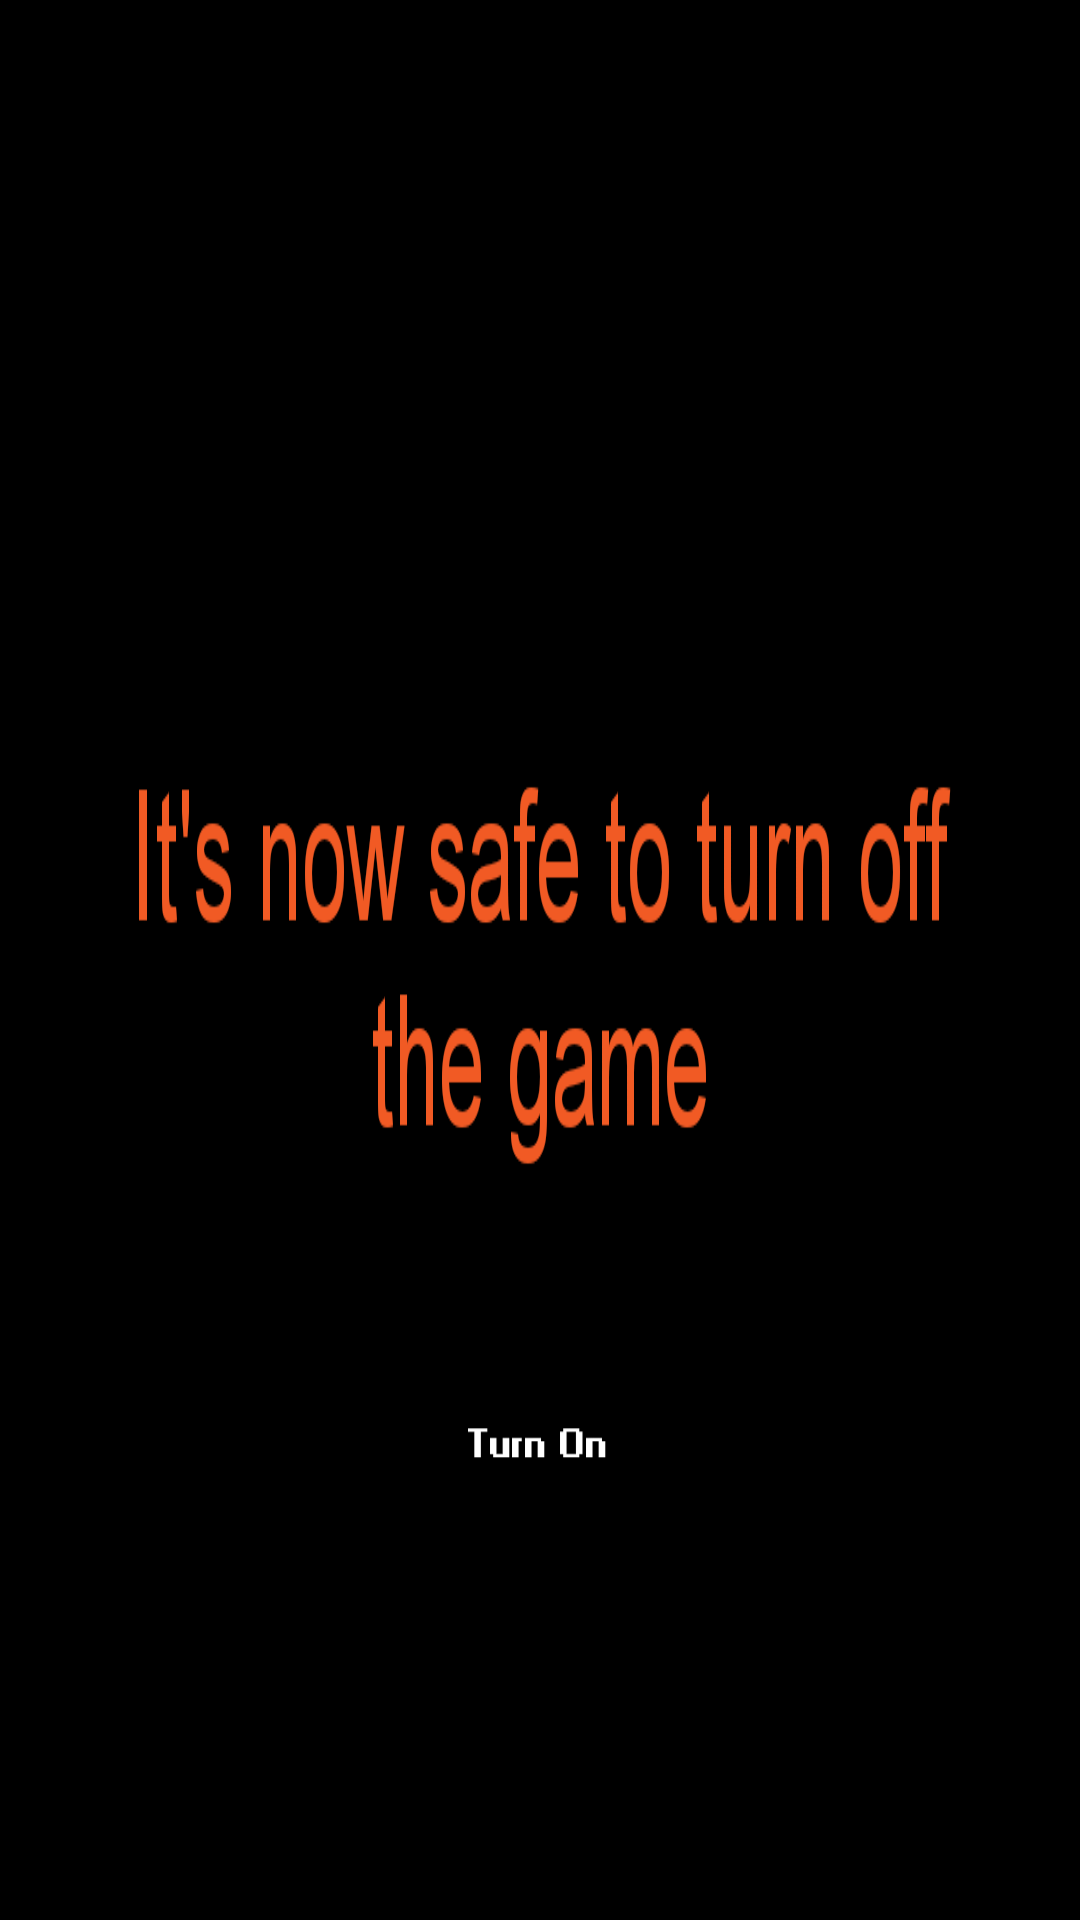 High Quality It's now safe to turn off the game! Blank Meme Template